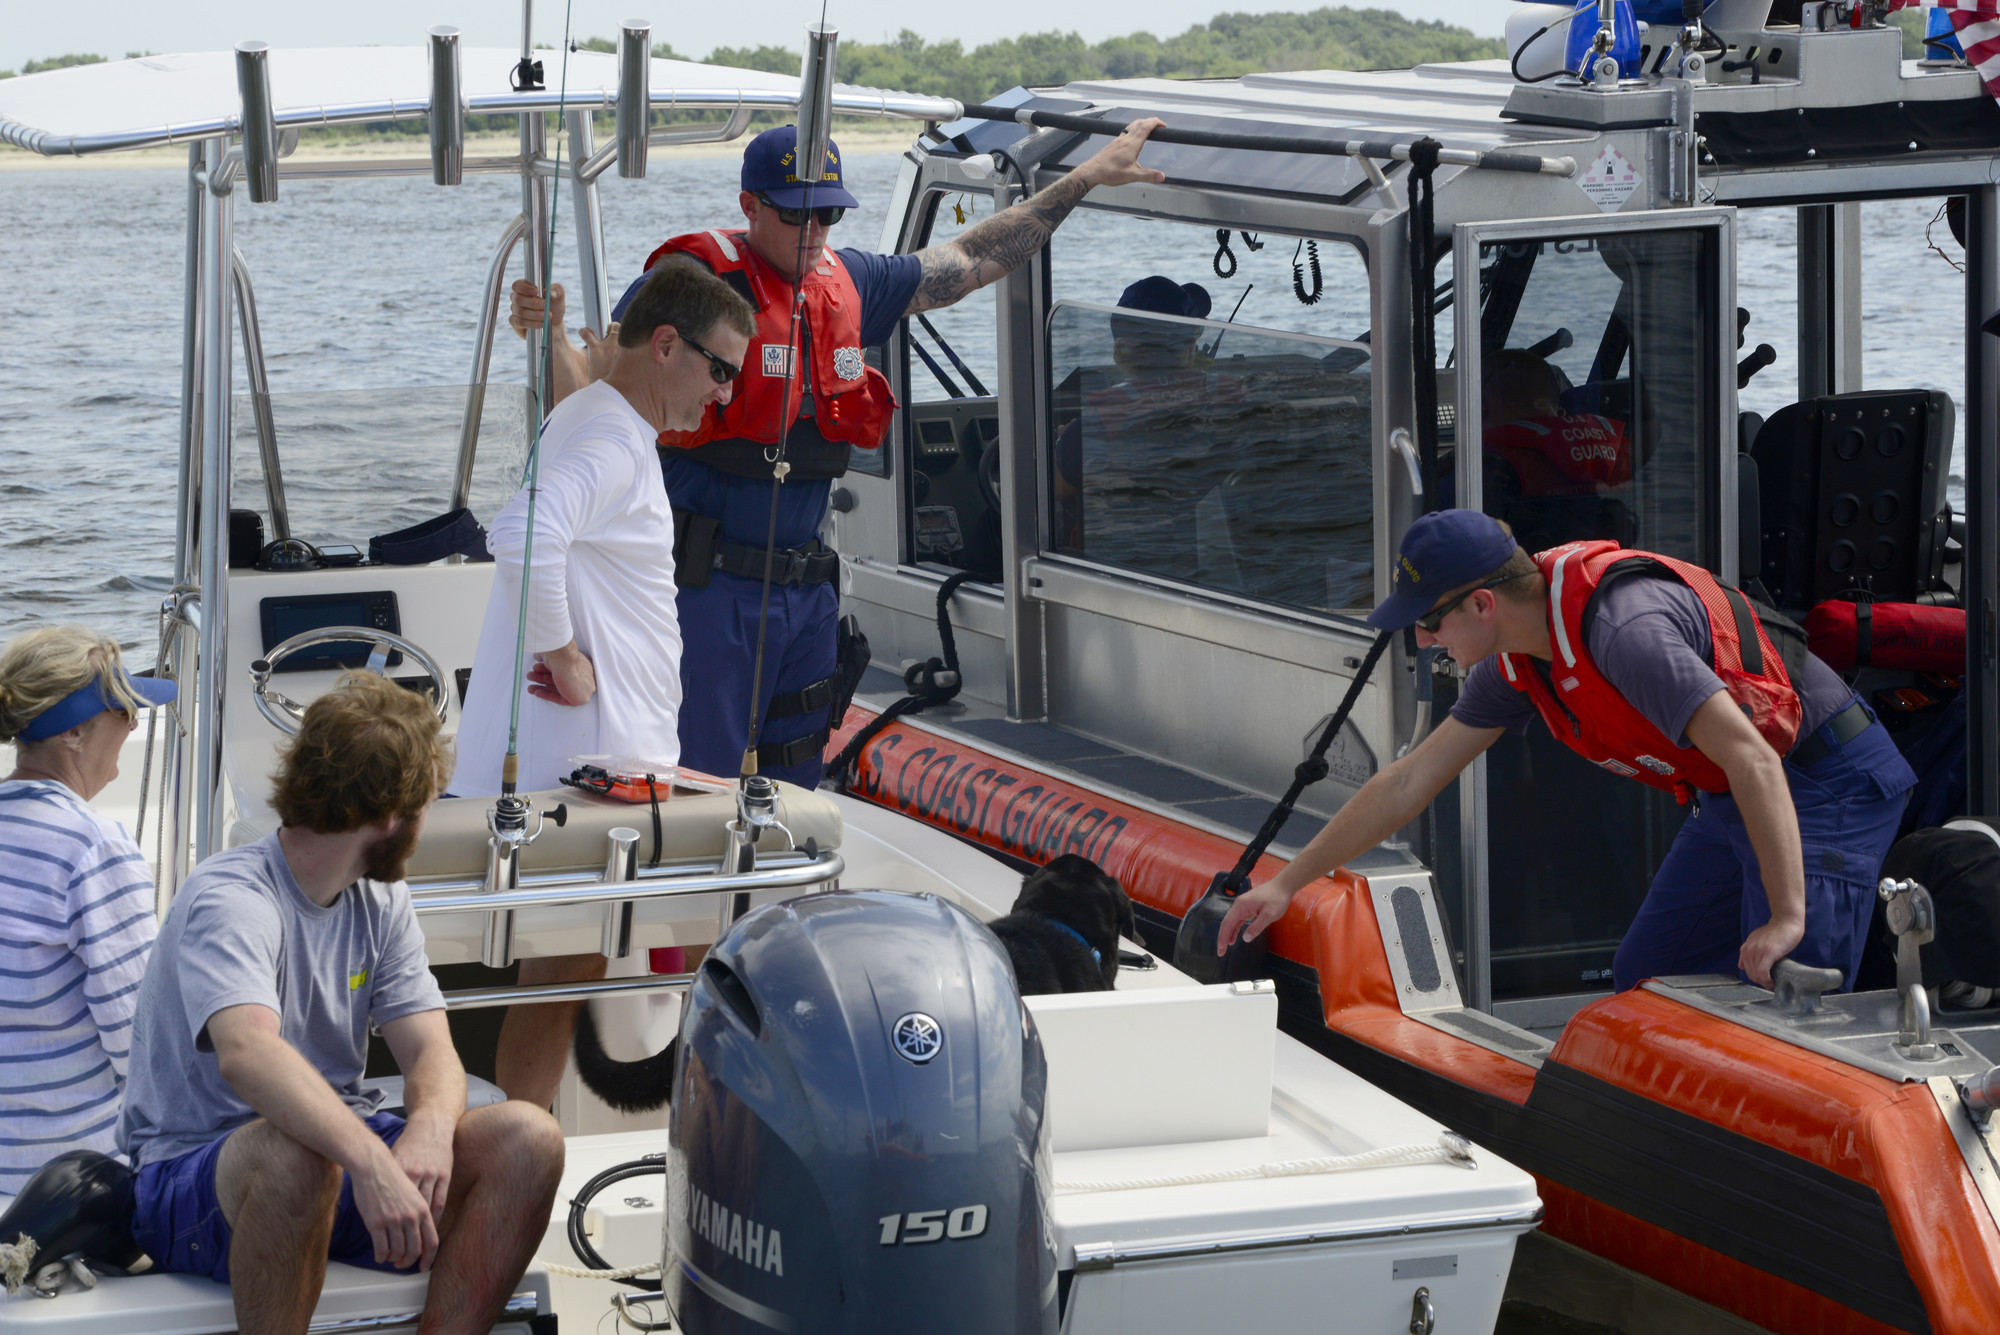 A U.S. Coast Guard response boat stops a recreational boater in the Charleston Harbor, S.C. Aug. 11, 2018, as part of Operation SHRIMP and GRITS, a multi-state and multi-jurisdiction maritime enforcement operation. The name stands for “Save Harbor Reach on Intelligence for Multi-state Partnerships and Guarding Responsible Interests for Target Safety.” The operation targets recreational and commercial vessels transitioning north and south along the Intracoastal Waterway and offshore. (U.S. Air Force photo by Senior Airman Tenley Long) 